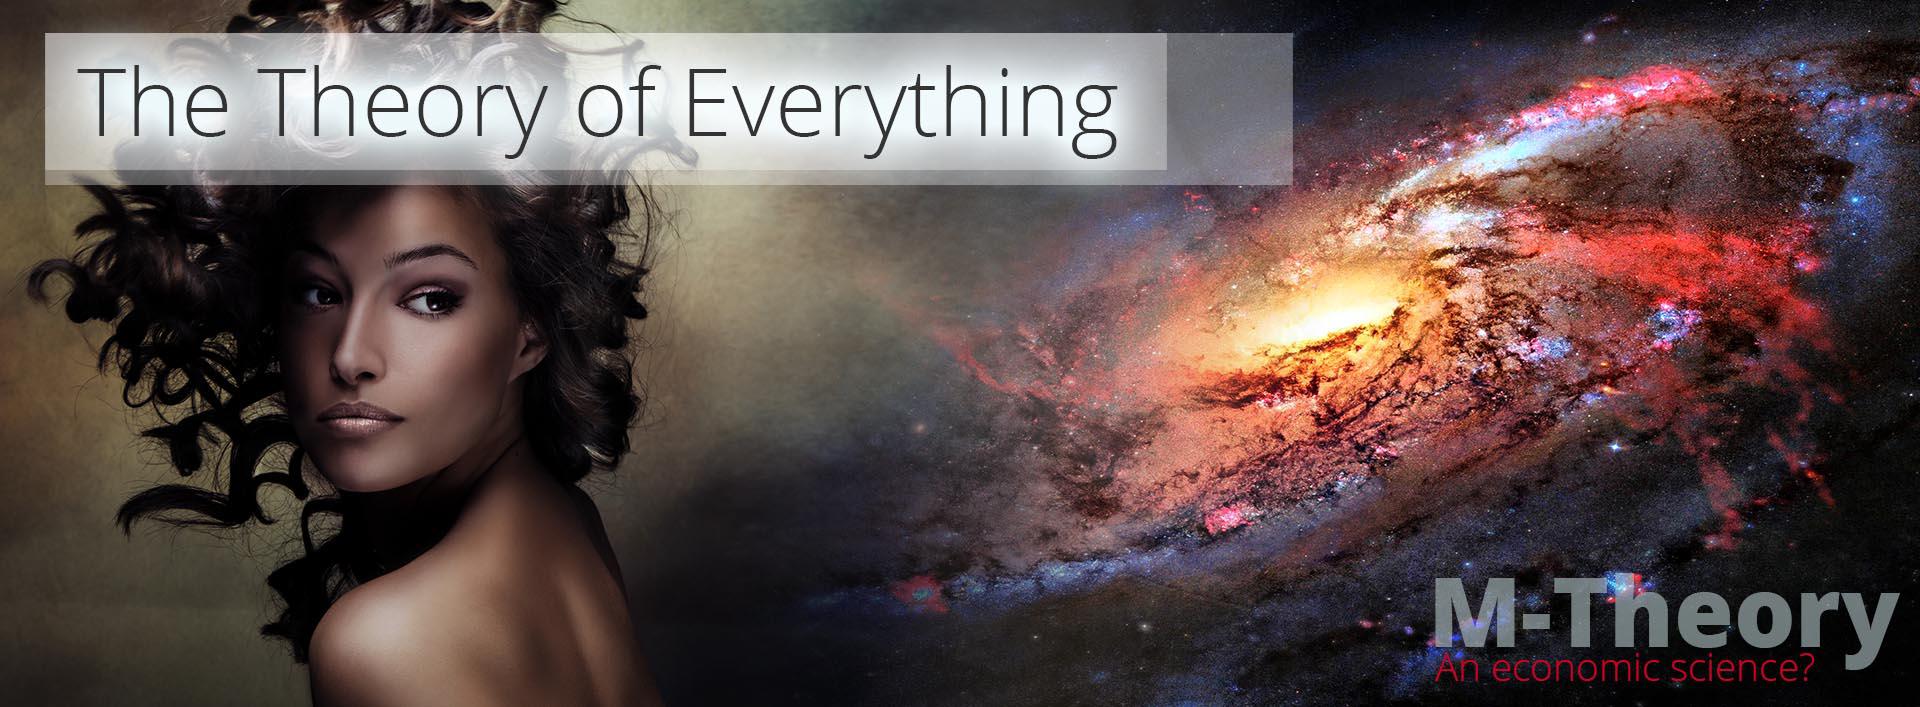 The Theory of Everything - M-Theory and Ecnomic Science